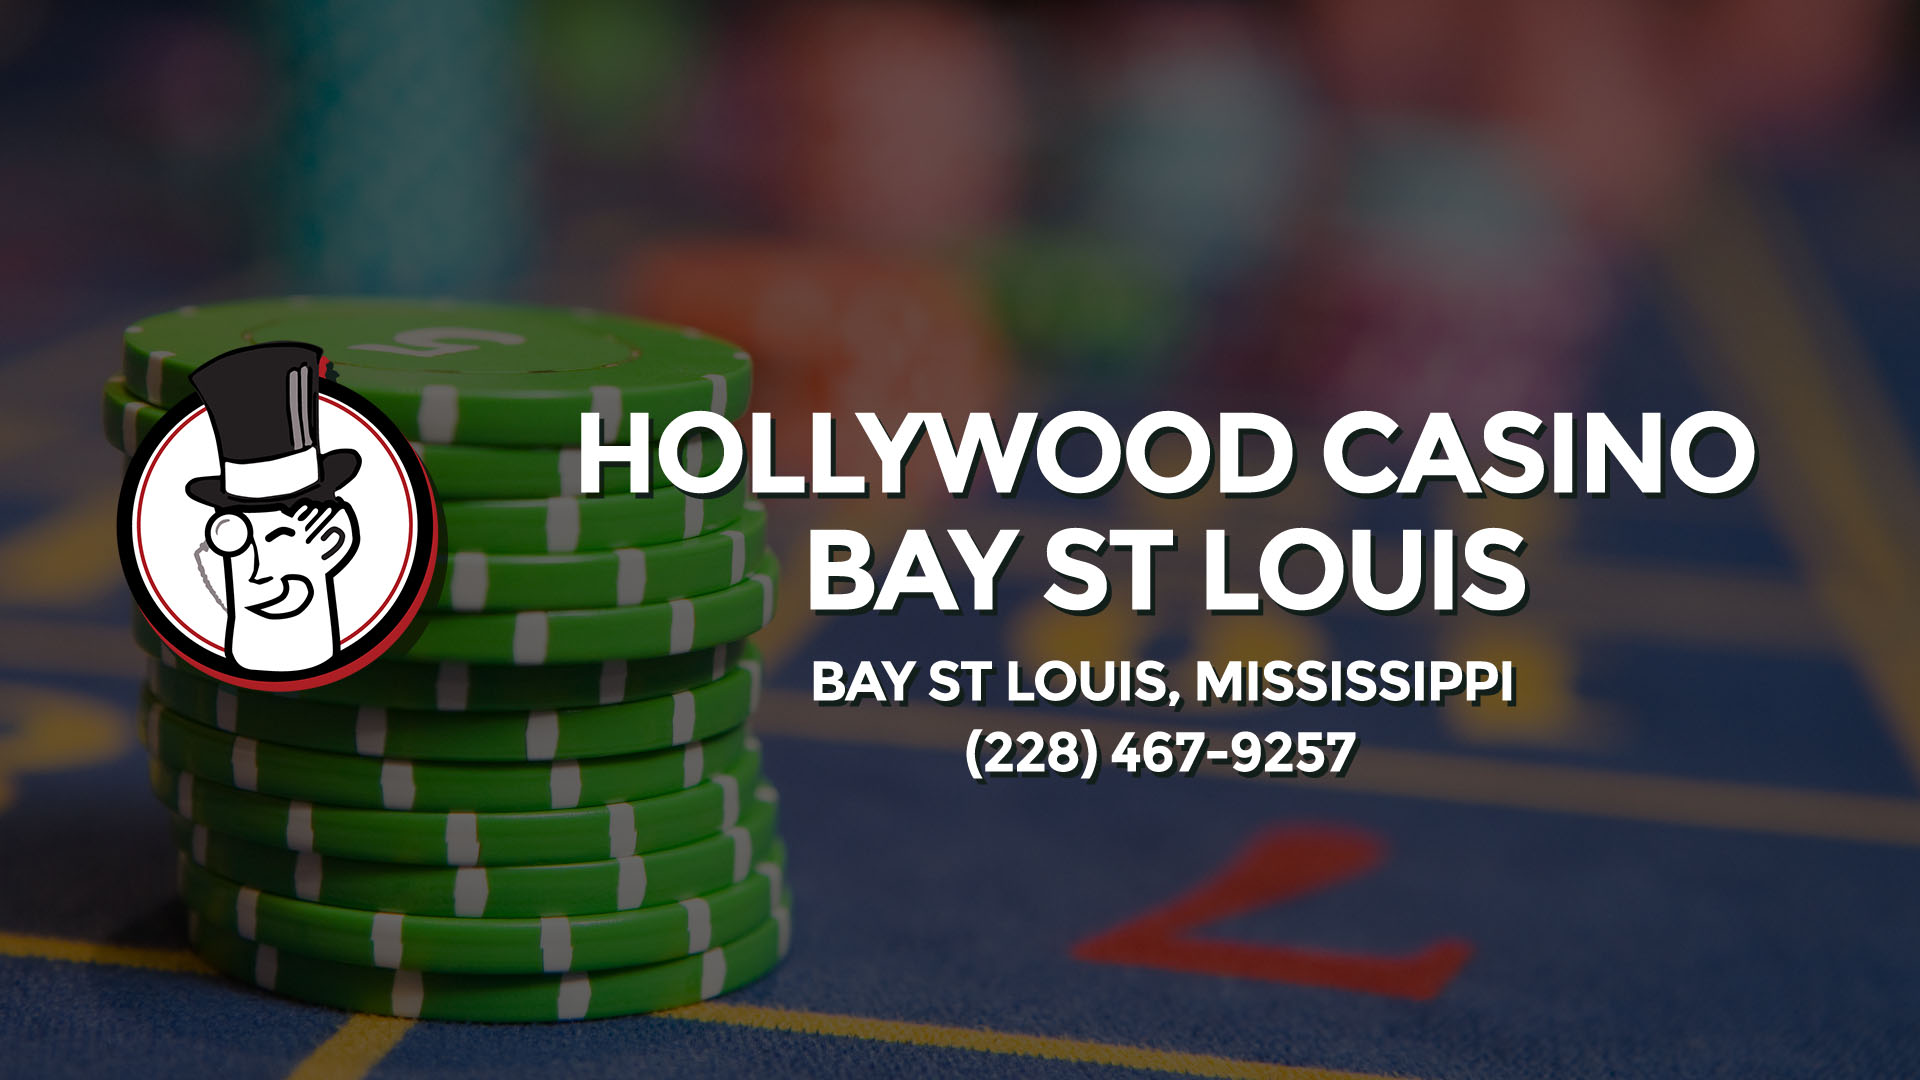 hollywood casino bay st louis mississippi